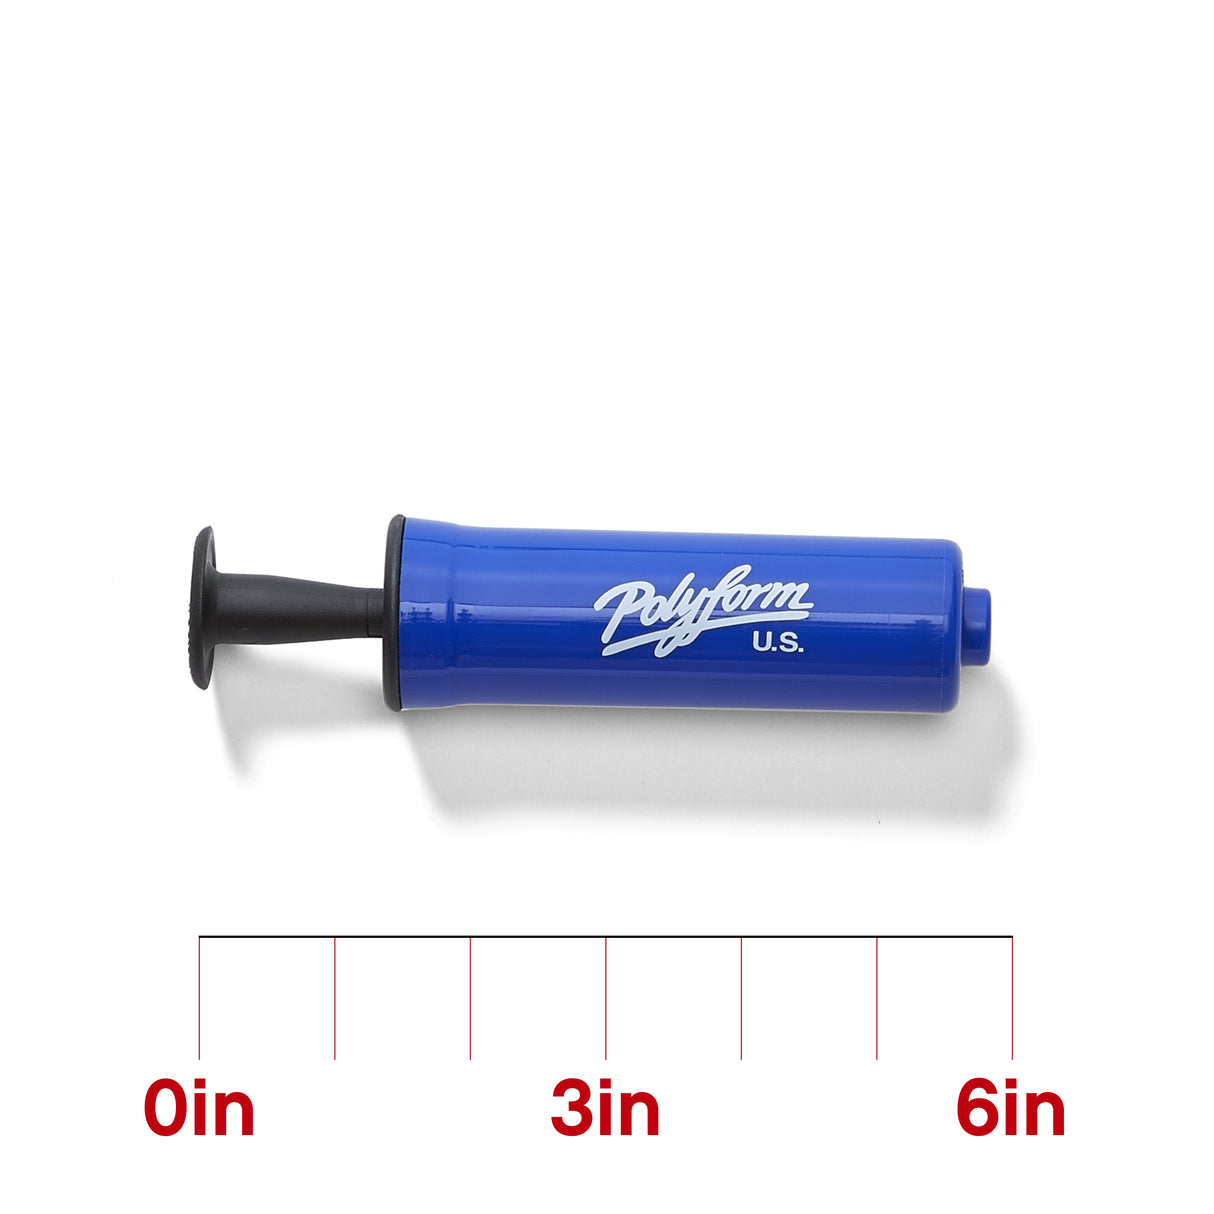 Polyform US mini hand pump for inflating boat fenders and buoys, with scale